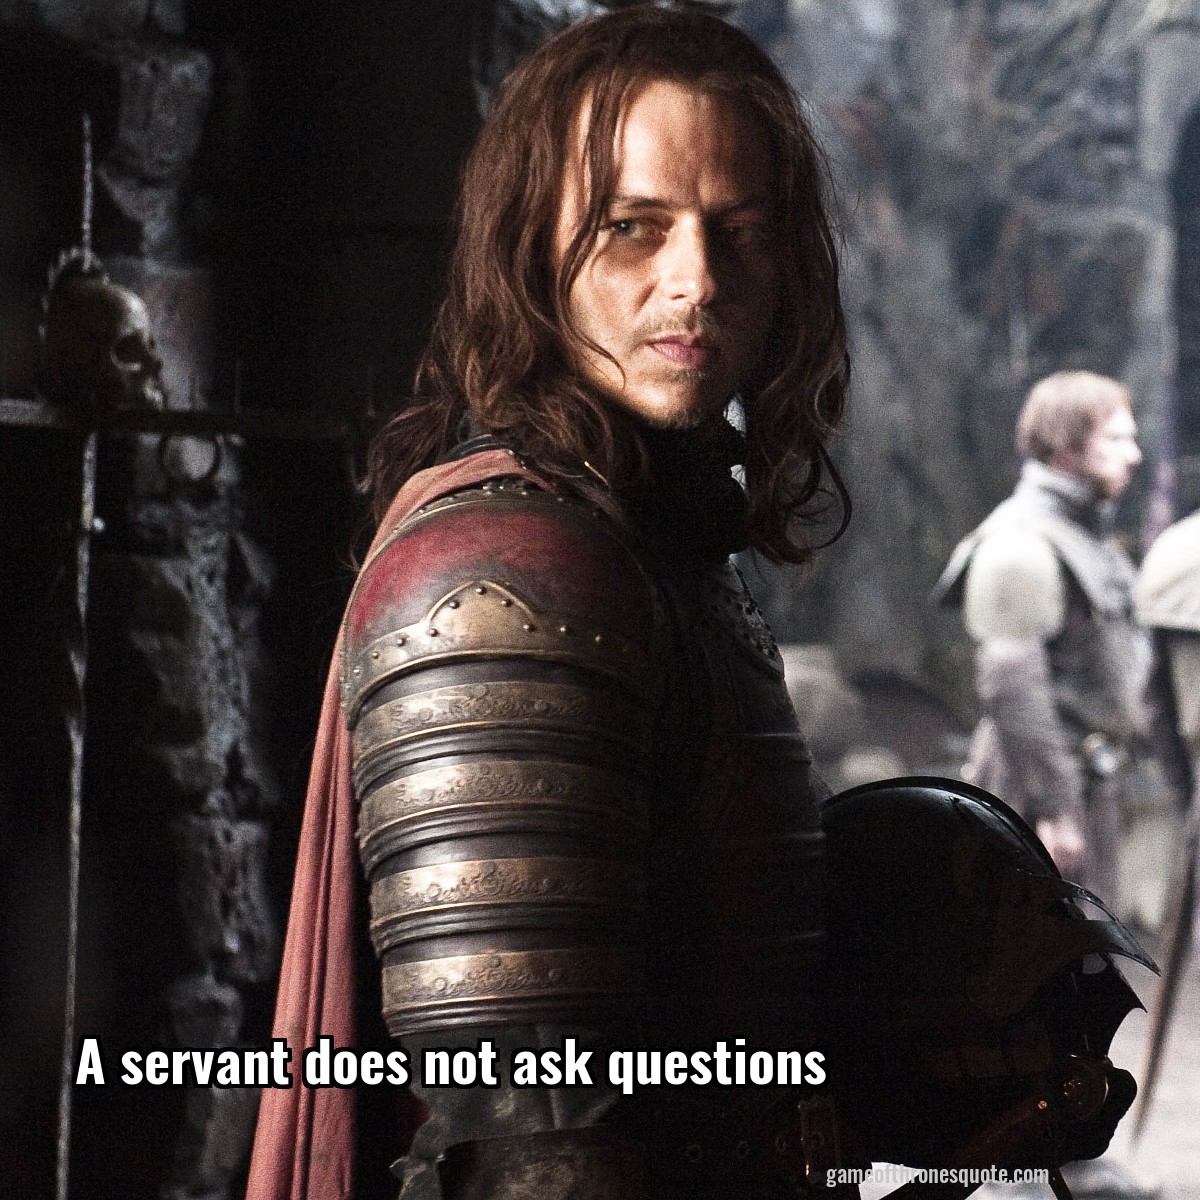 A servant does not ask questions